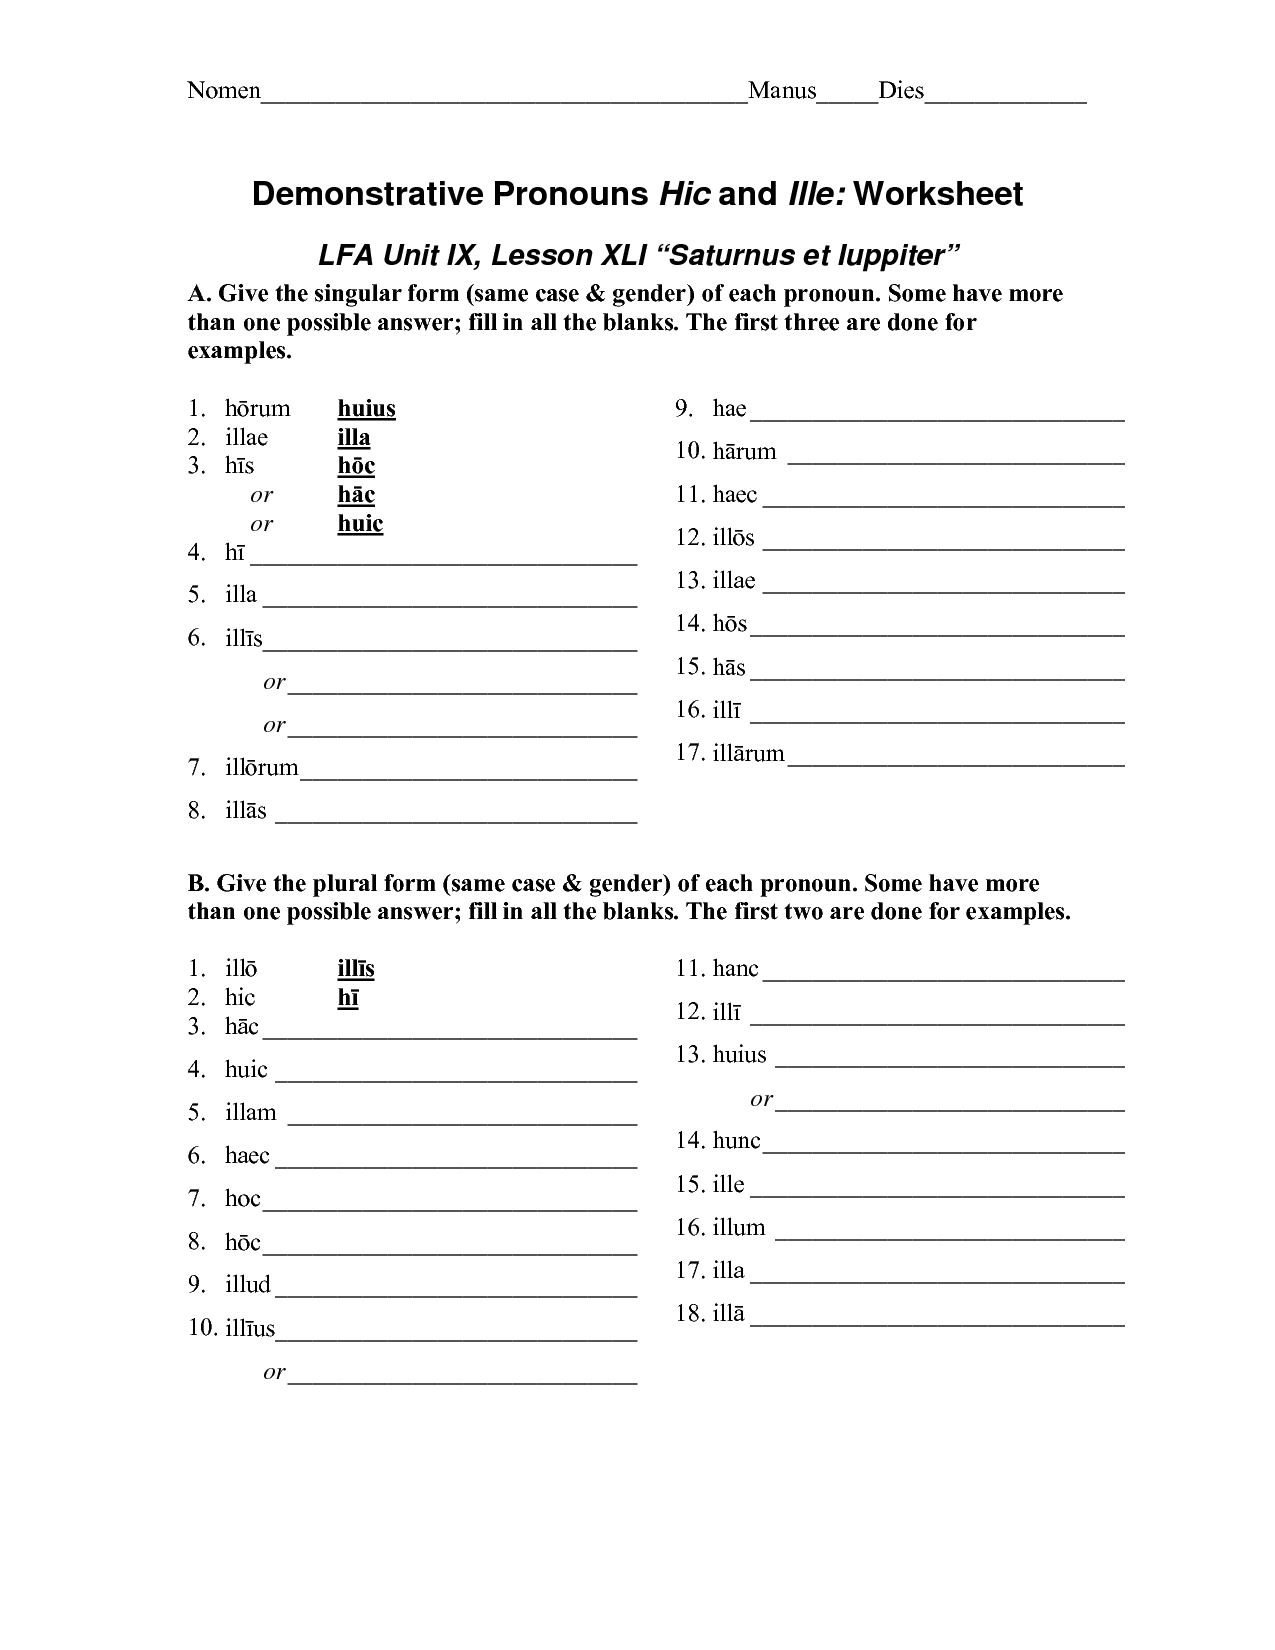 16-best-images-of-worksheets-adjectives-and-pronouns-demonstrative